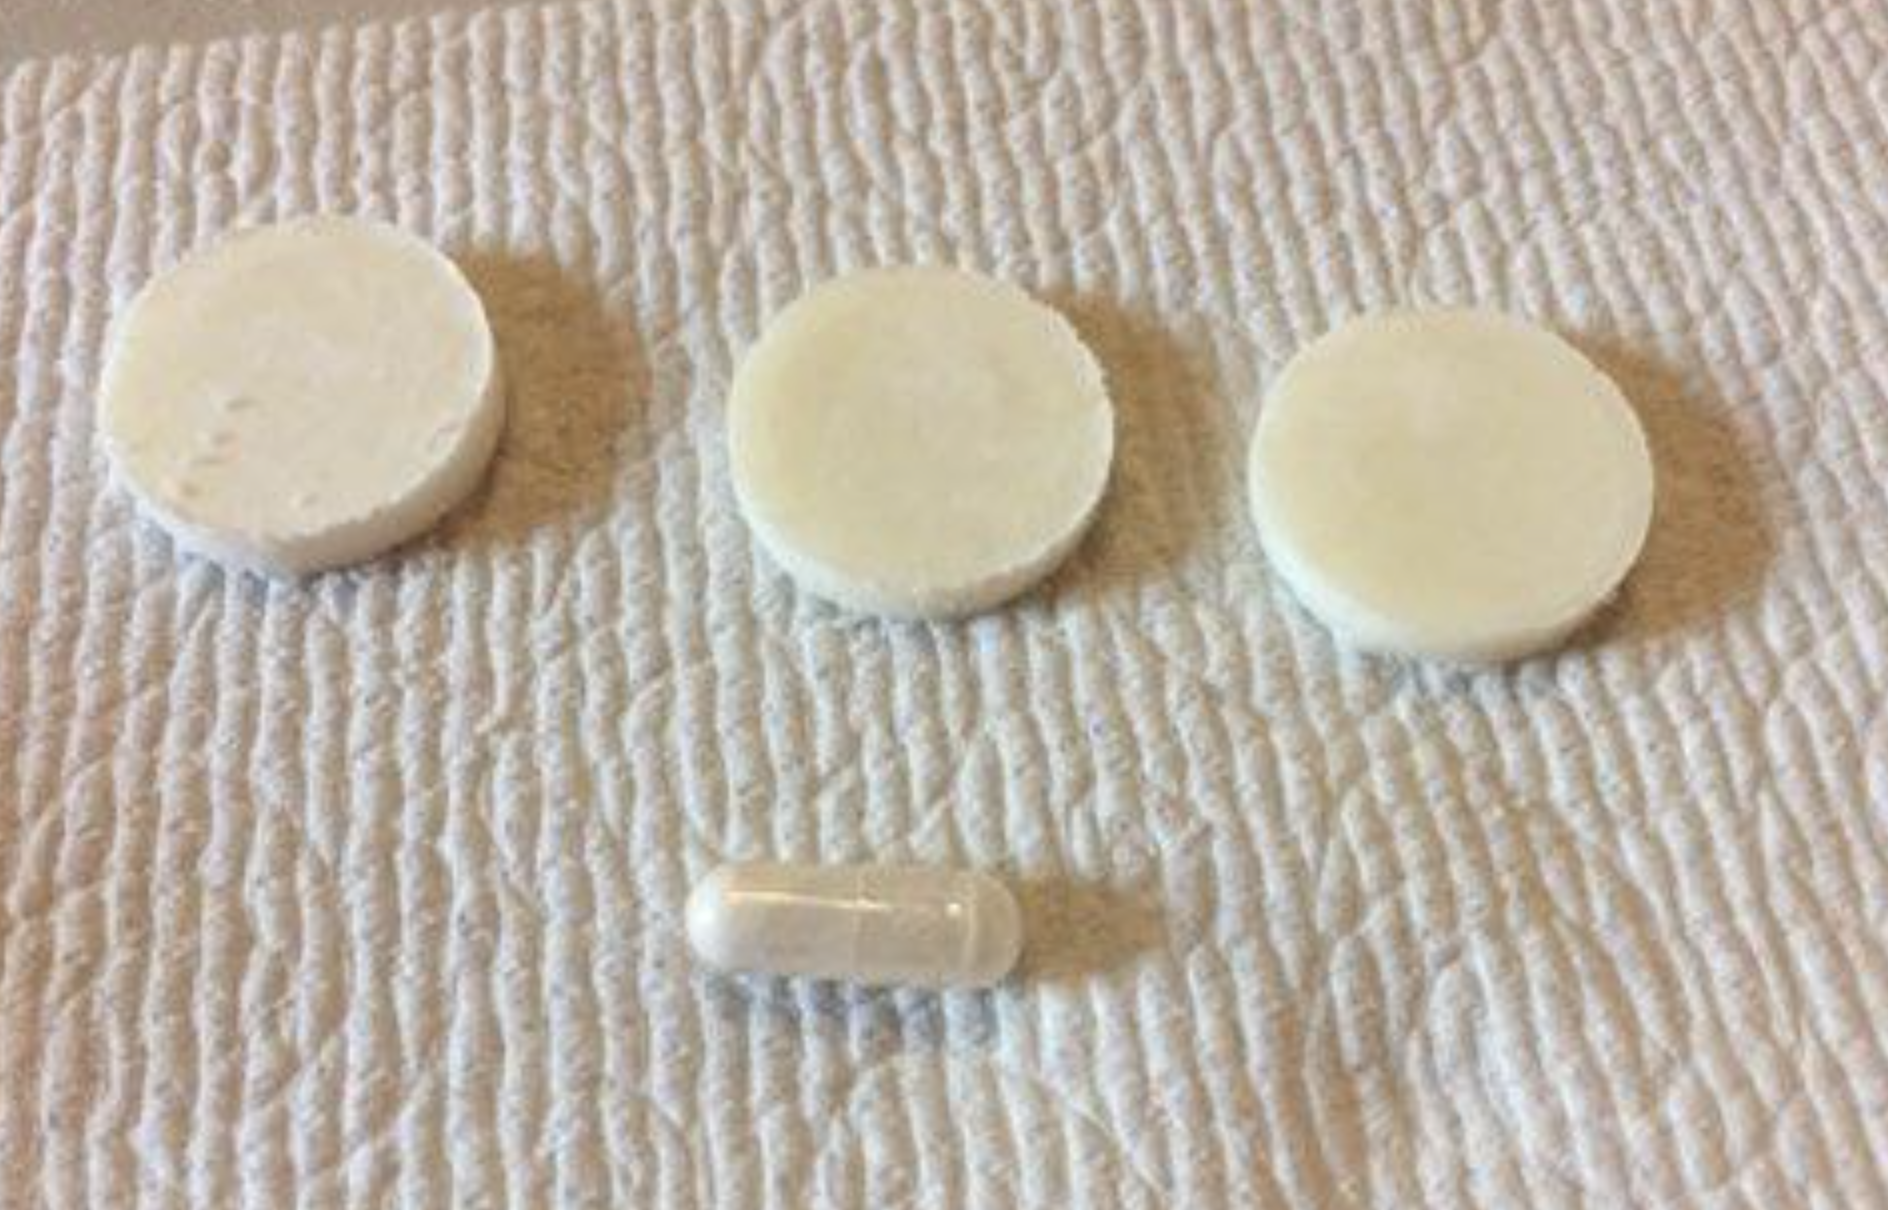 Anarchist Collective Shares Instructions to Make DIY Abortion Pills